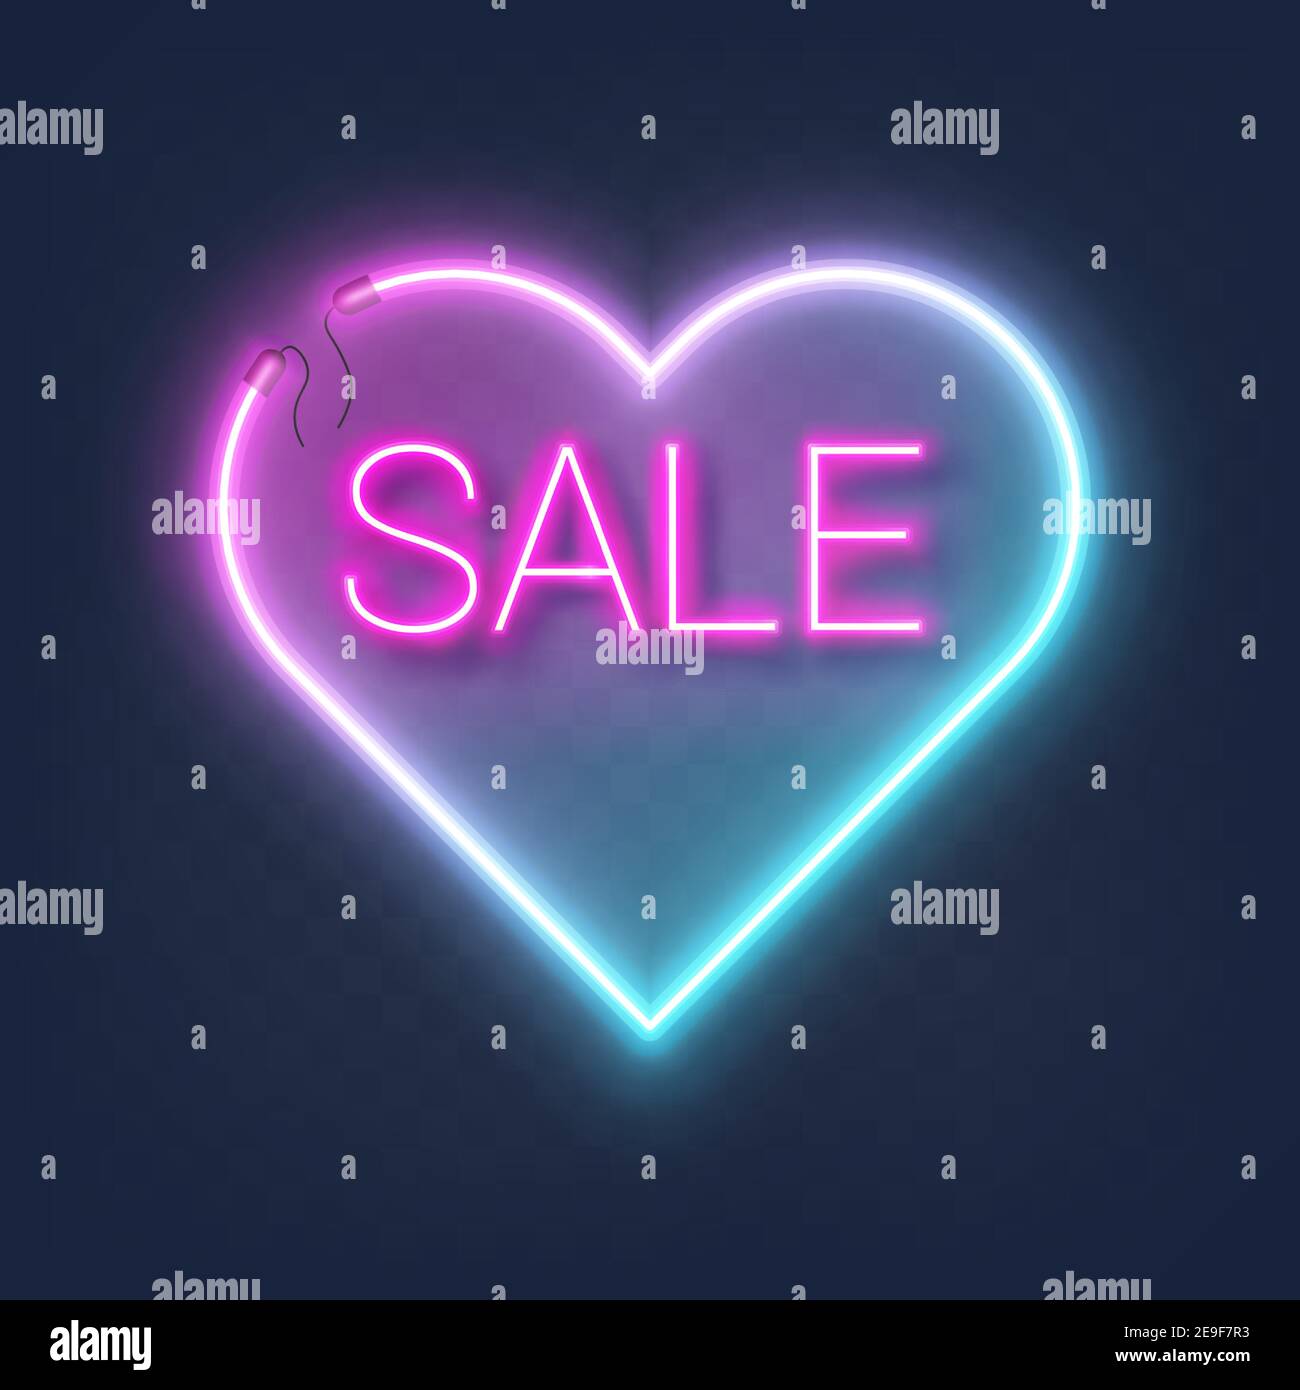 Realistic glowing shape neon heart frame with sale sign isolated on transparent background with place for text. Shining and glowing neon effect with Stock Vector